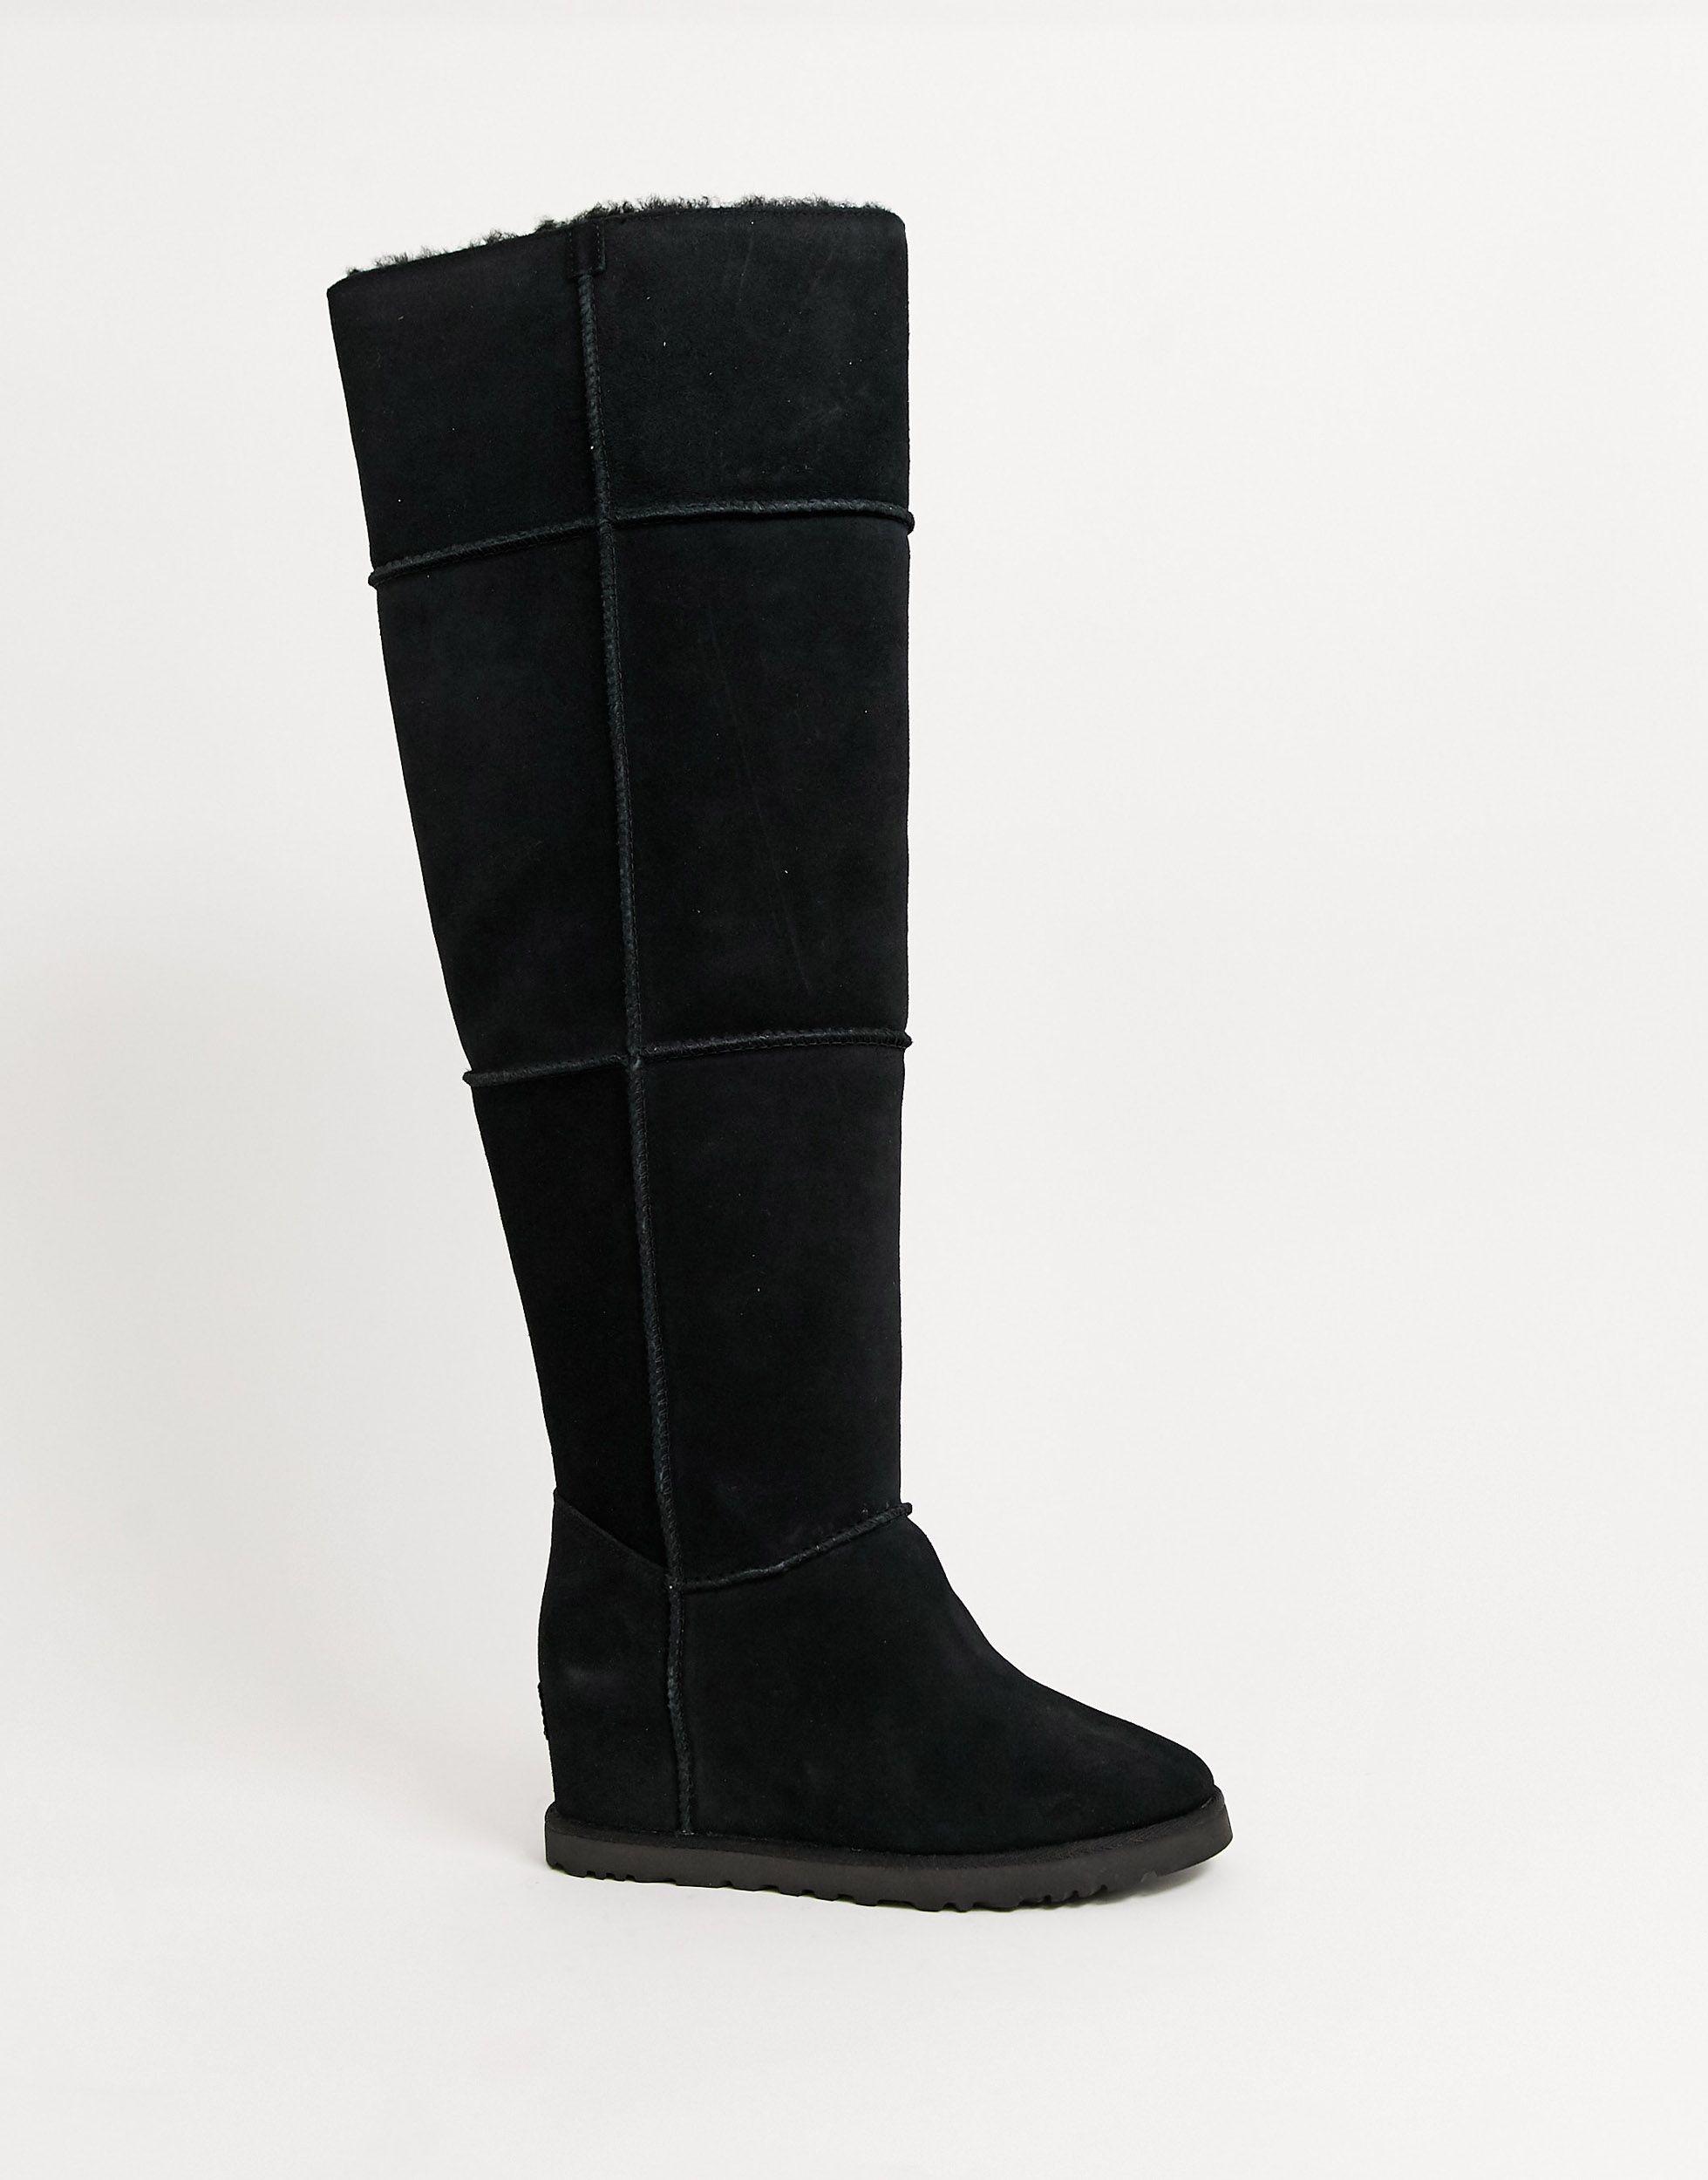 UGG Classic Femme Over-the-knee Sheepskin-lined Suede Boots in Black Suede  (Black) - Save 67% | Lyst